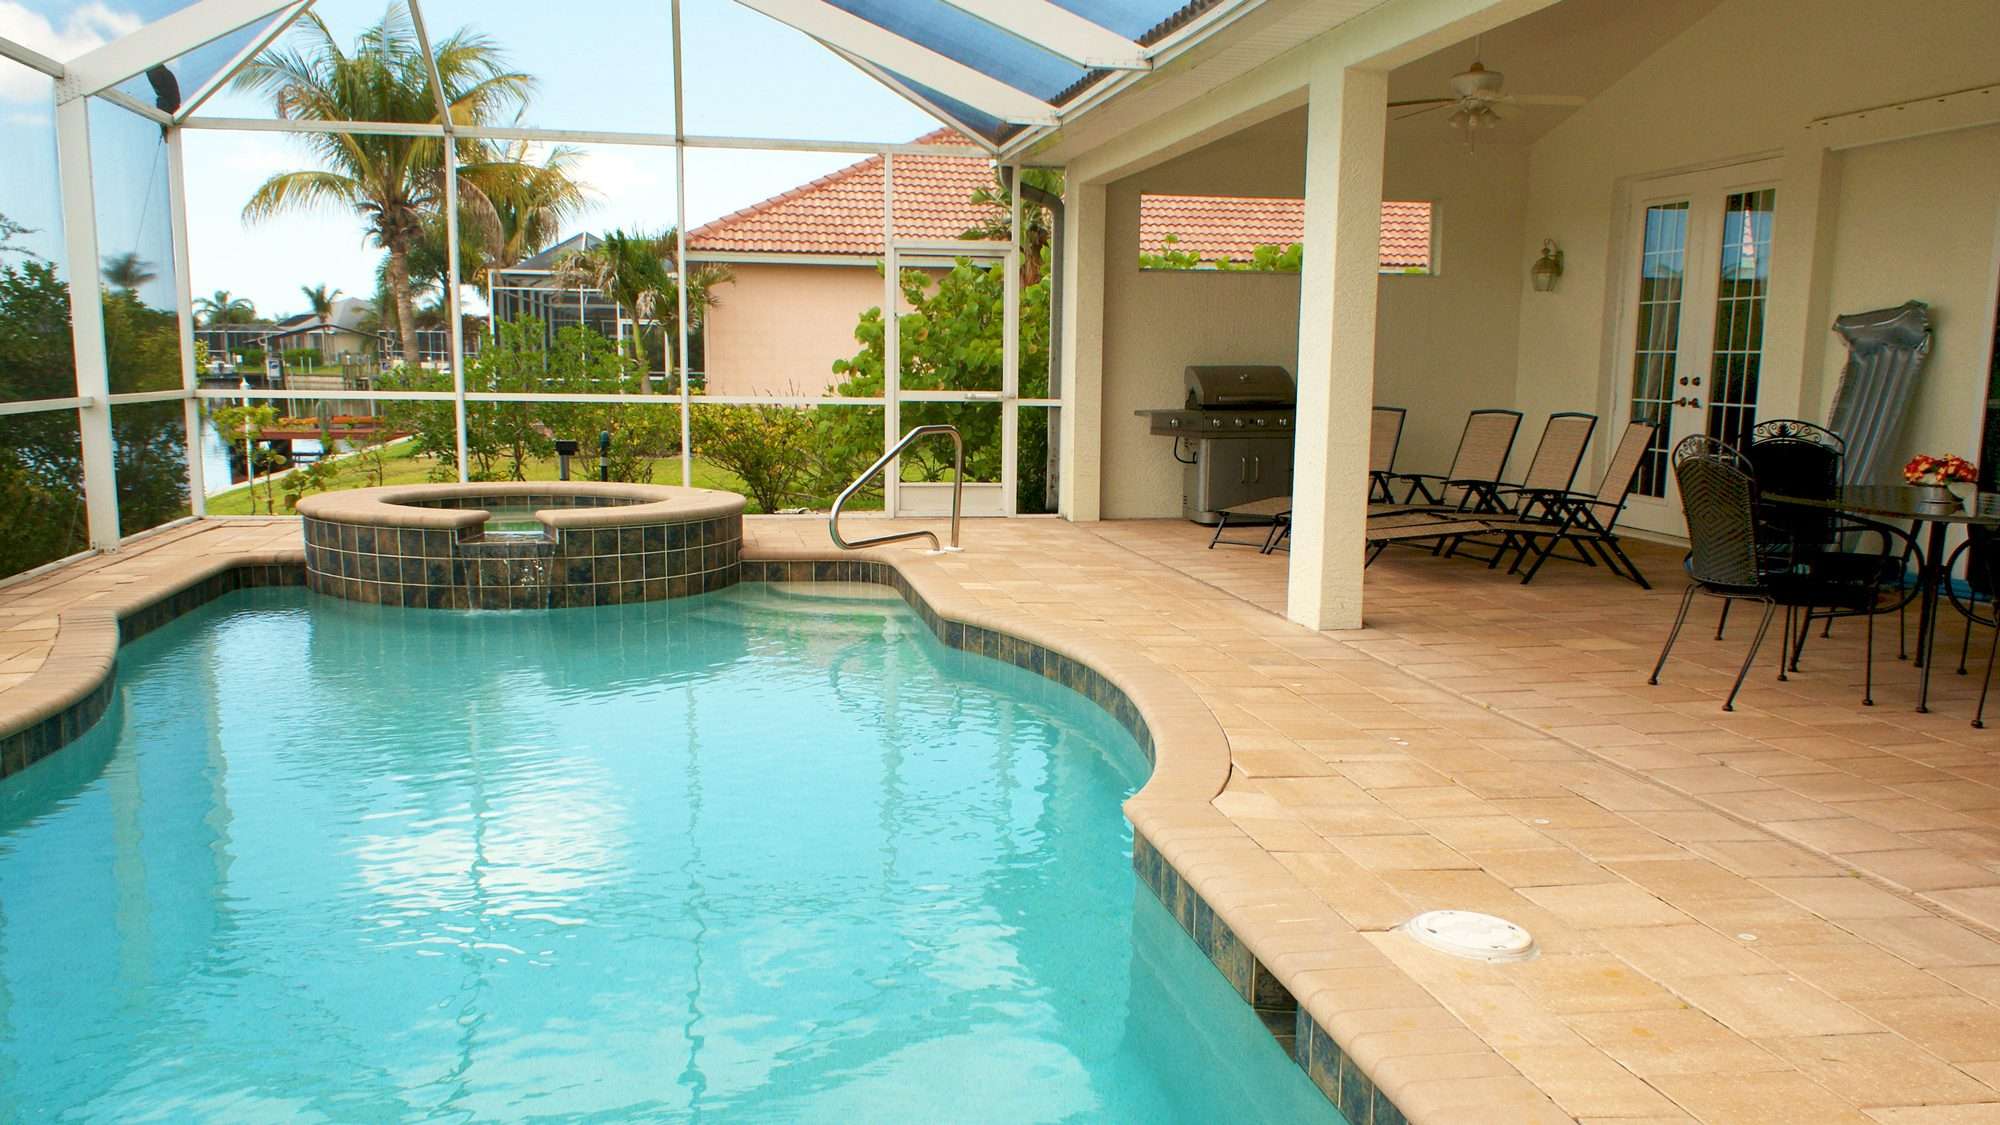 Building an Indoor Pool: The Costs, Pros and Cons